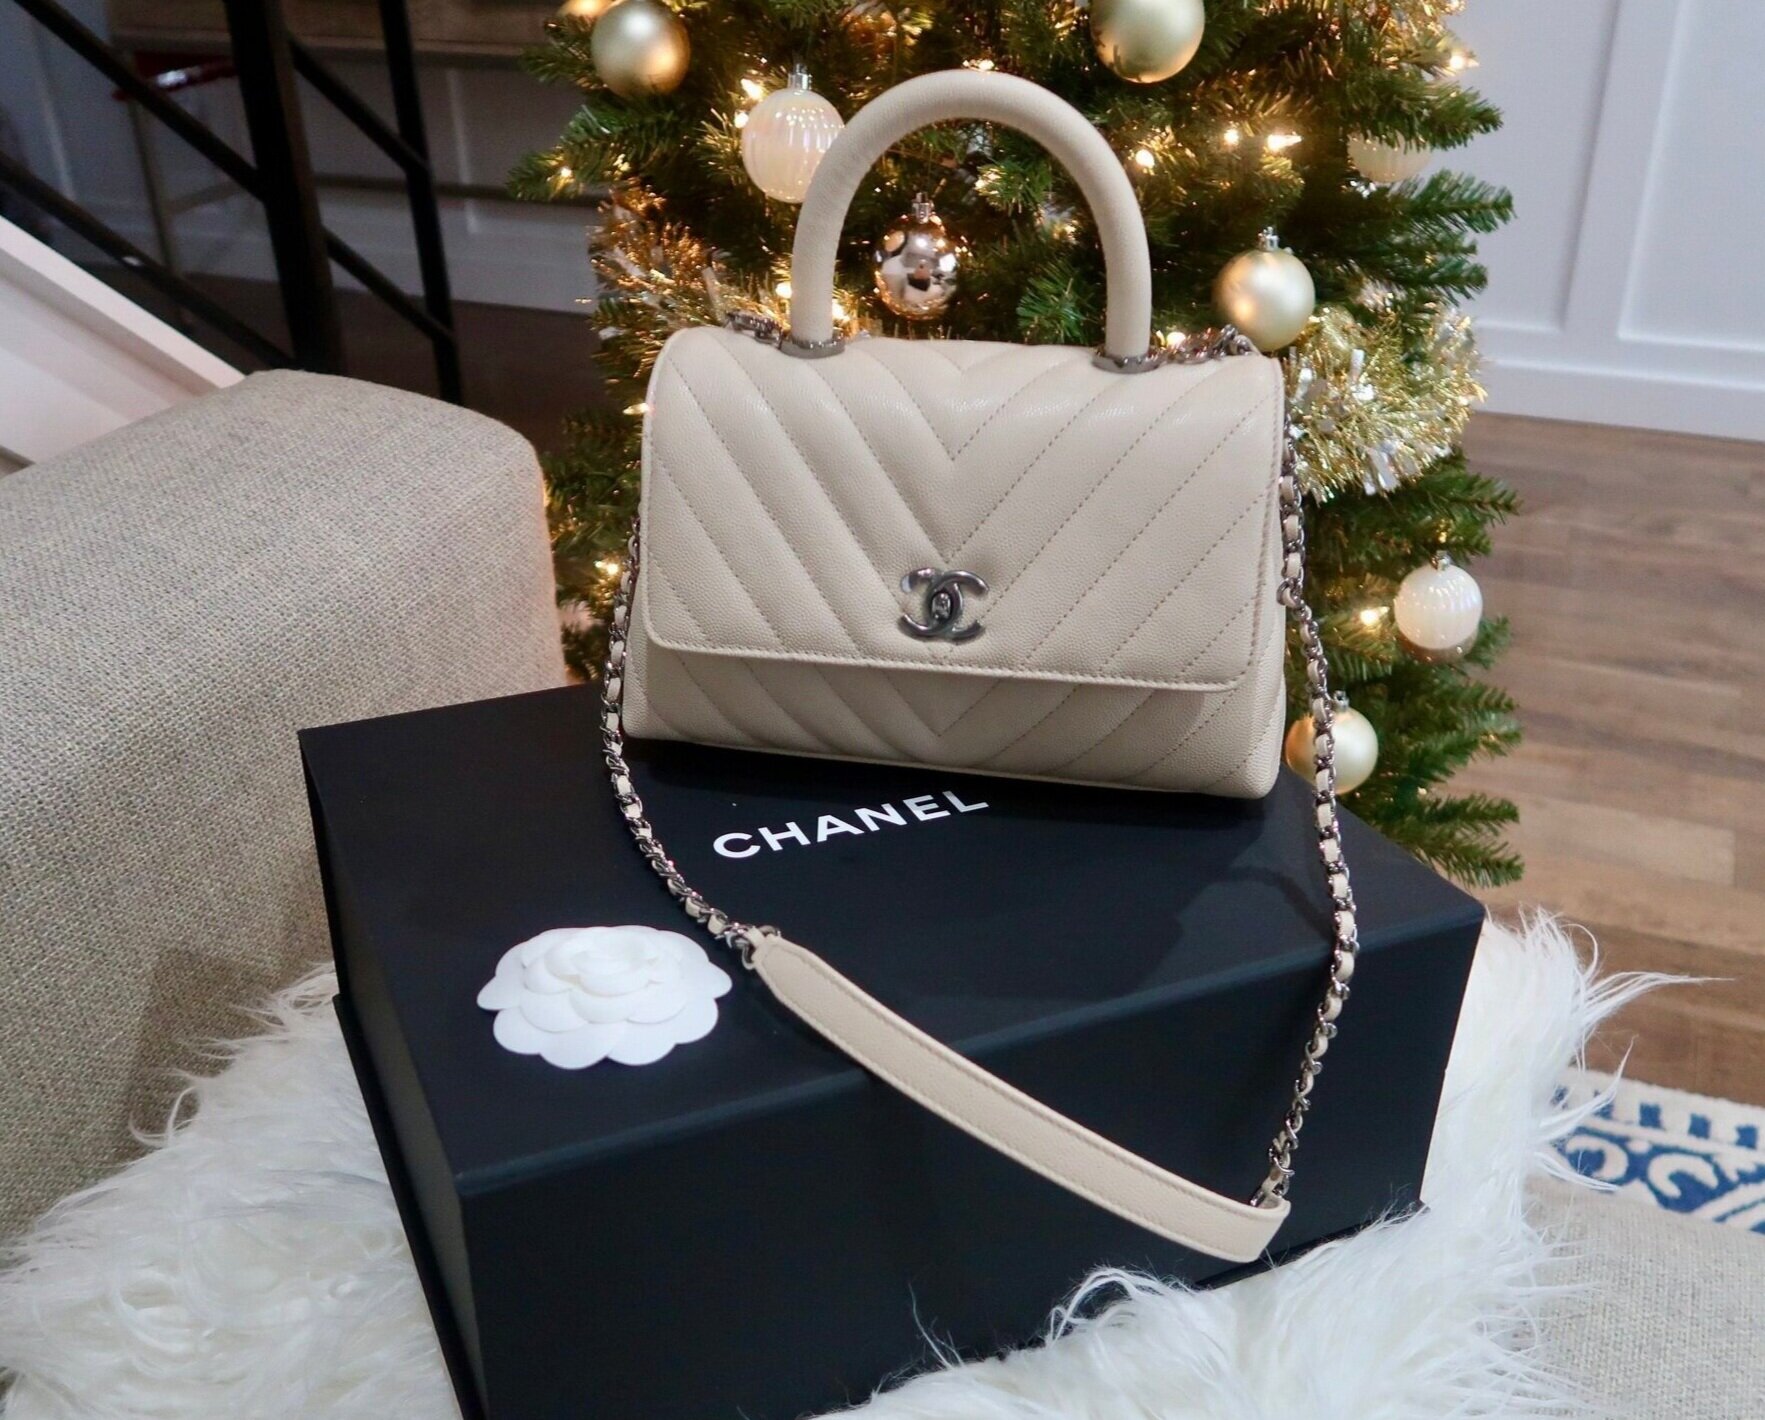 Review of Chanel Flap Bag with Top Handle (Coco Handle Bag) — My